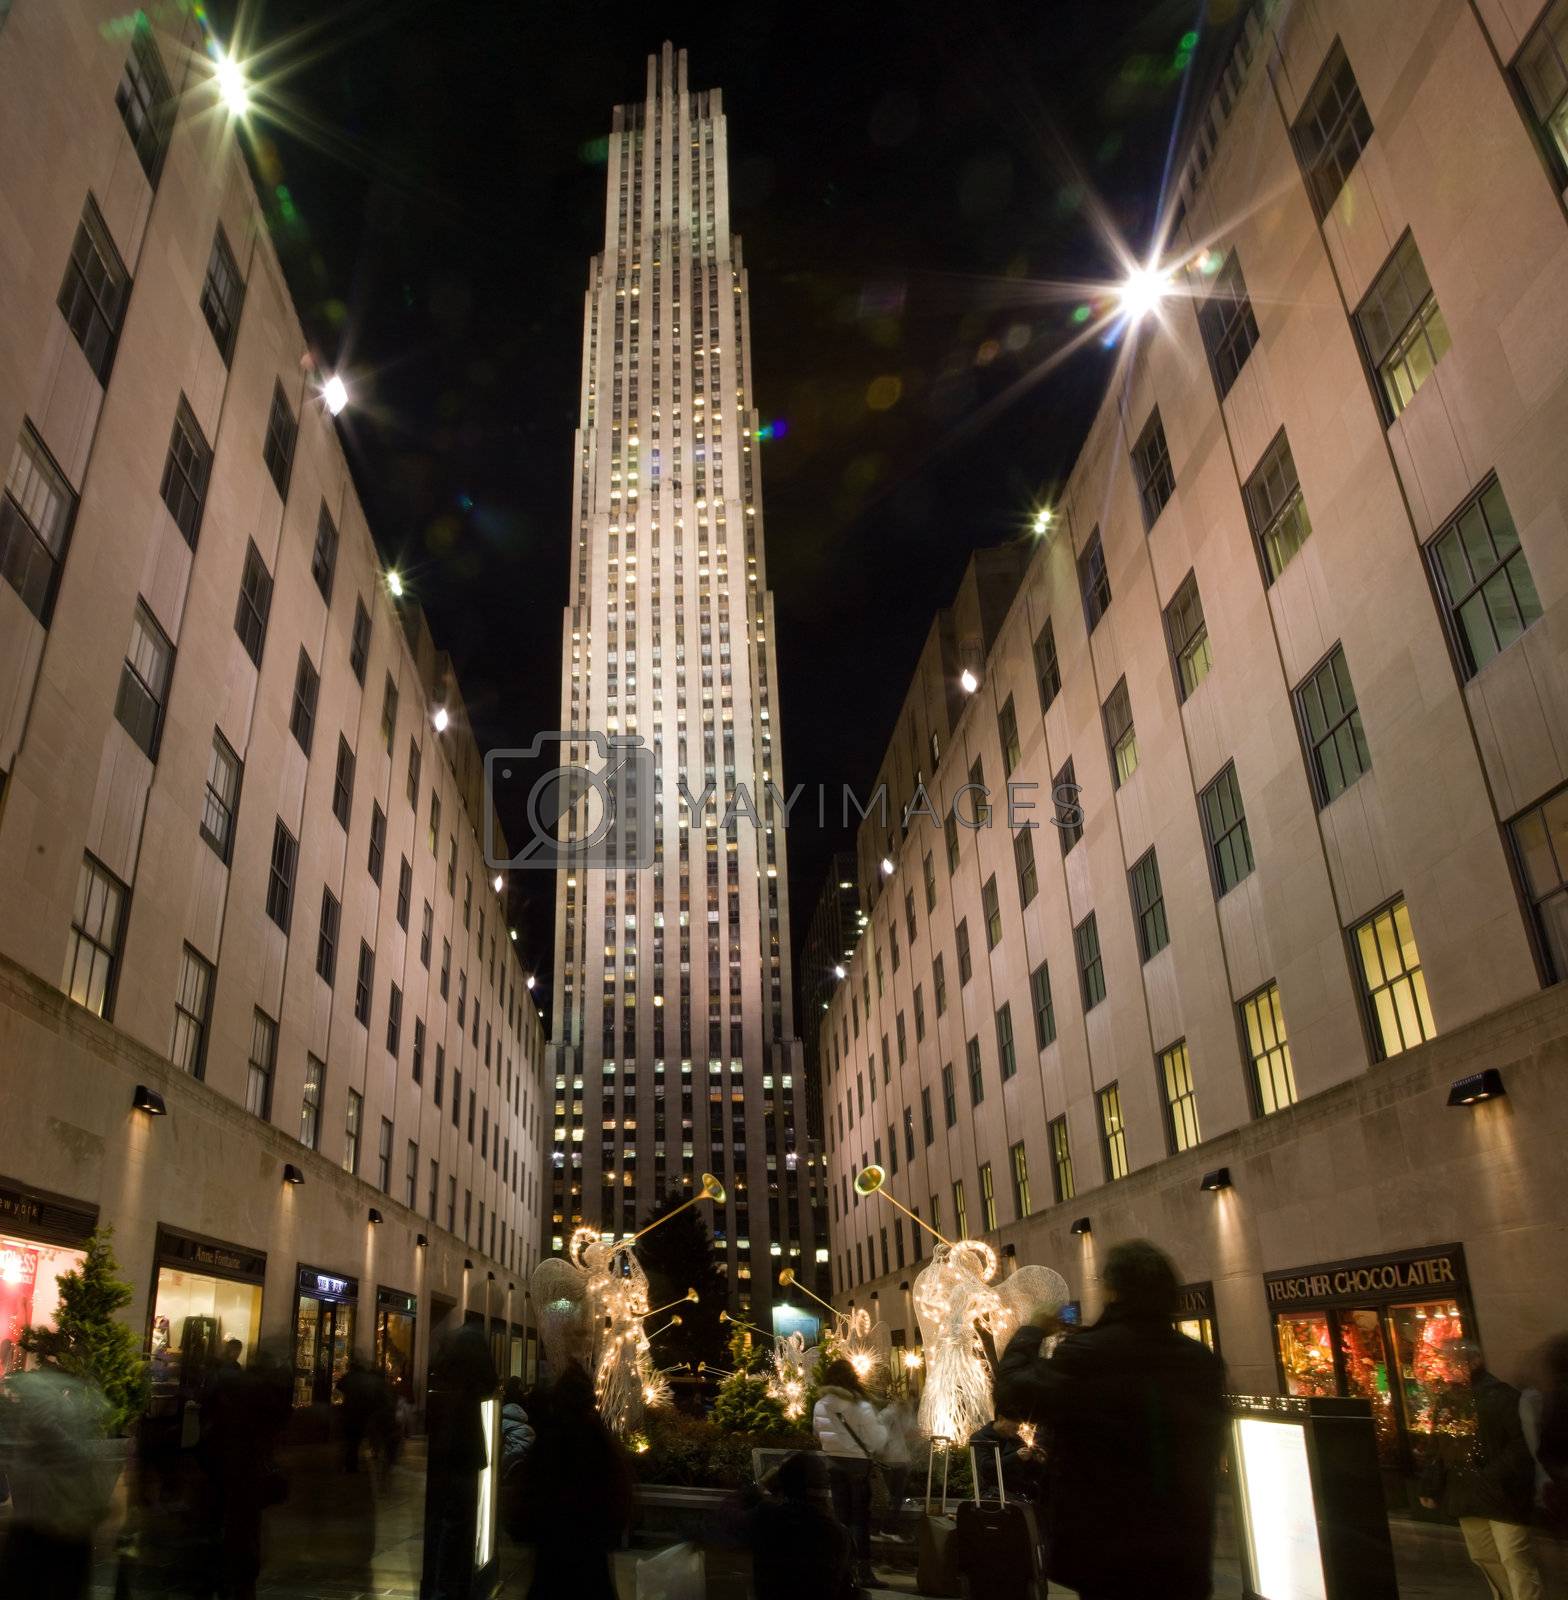 Royalty free image of Rockefeller Center at Christmas time by phakimata